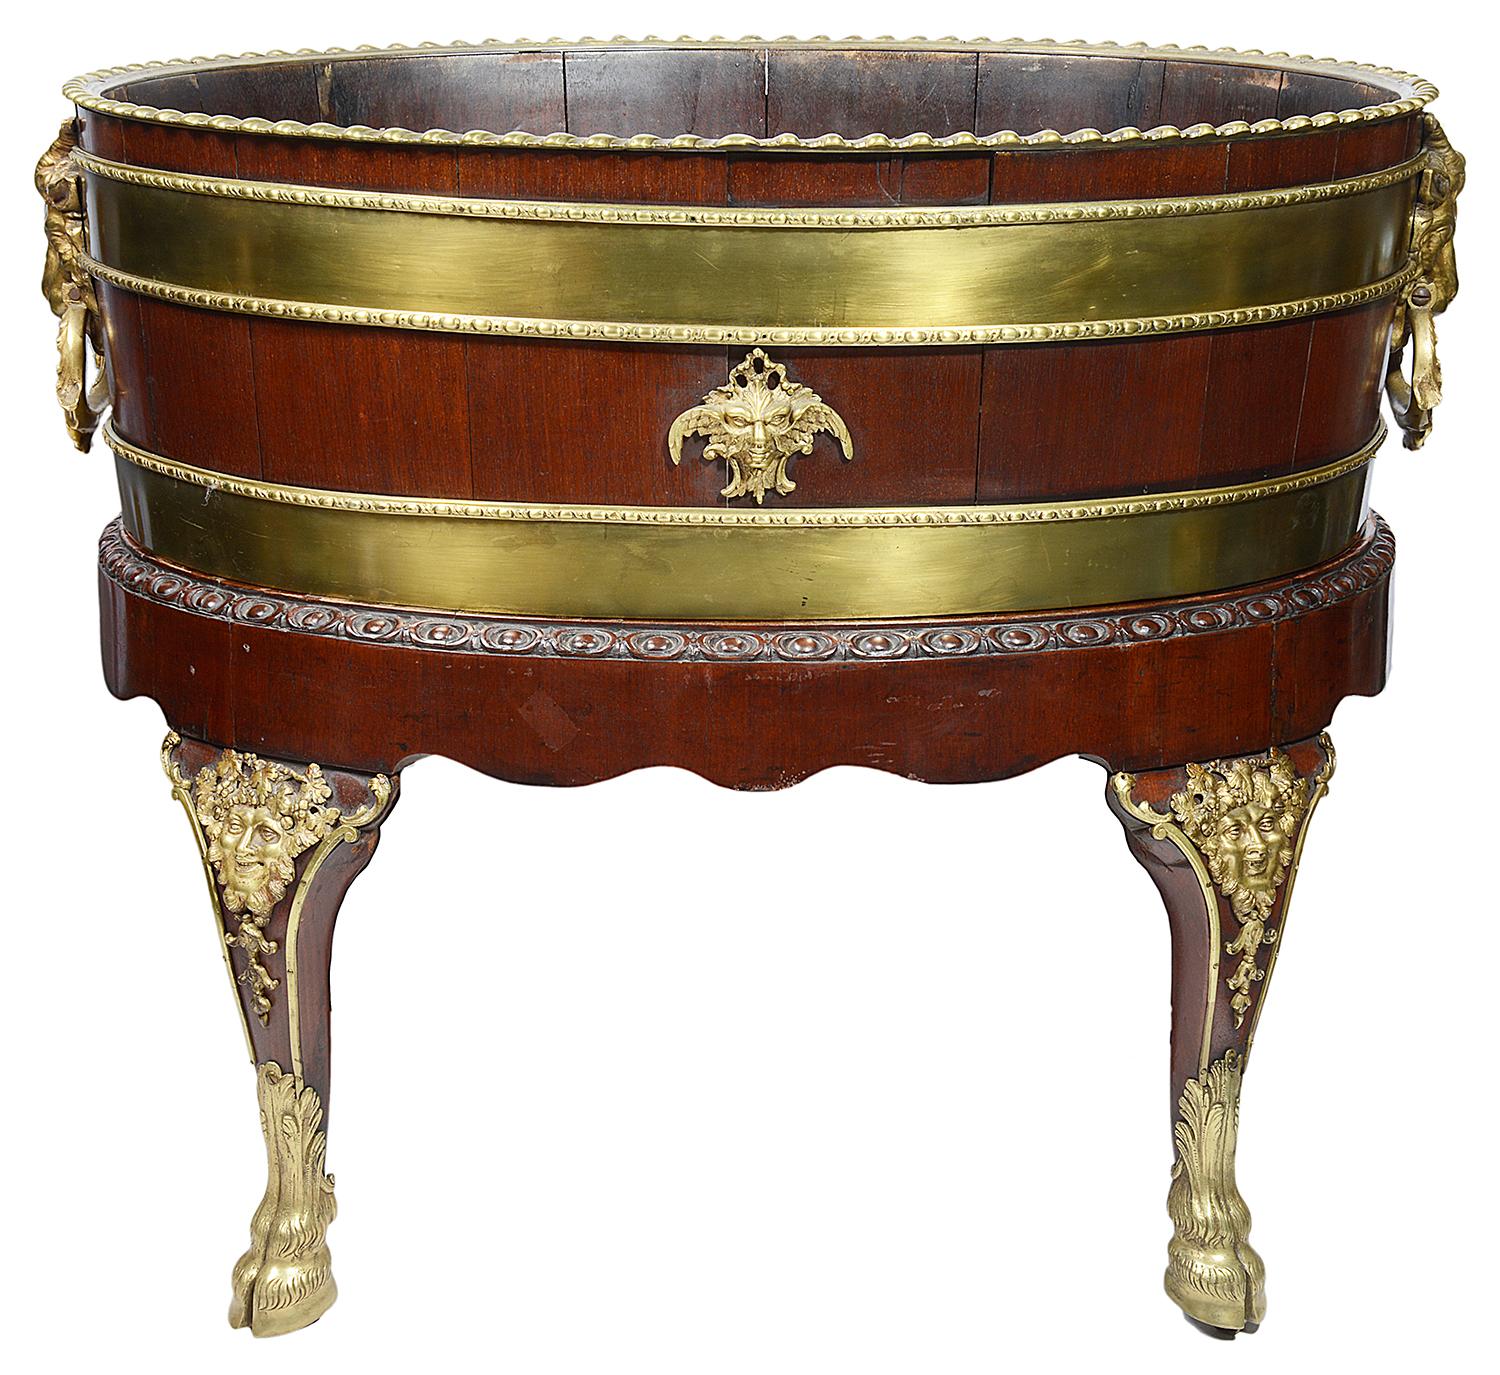 A George III style gilt-lacquered brass-mounted mahogany wine cooler
After Samuel Norman, circa 1765.
The oval body with gadrooned rim , bound by two bands with cabochon edges, each side mounted with a winged mask and the ends with goat masks